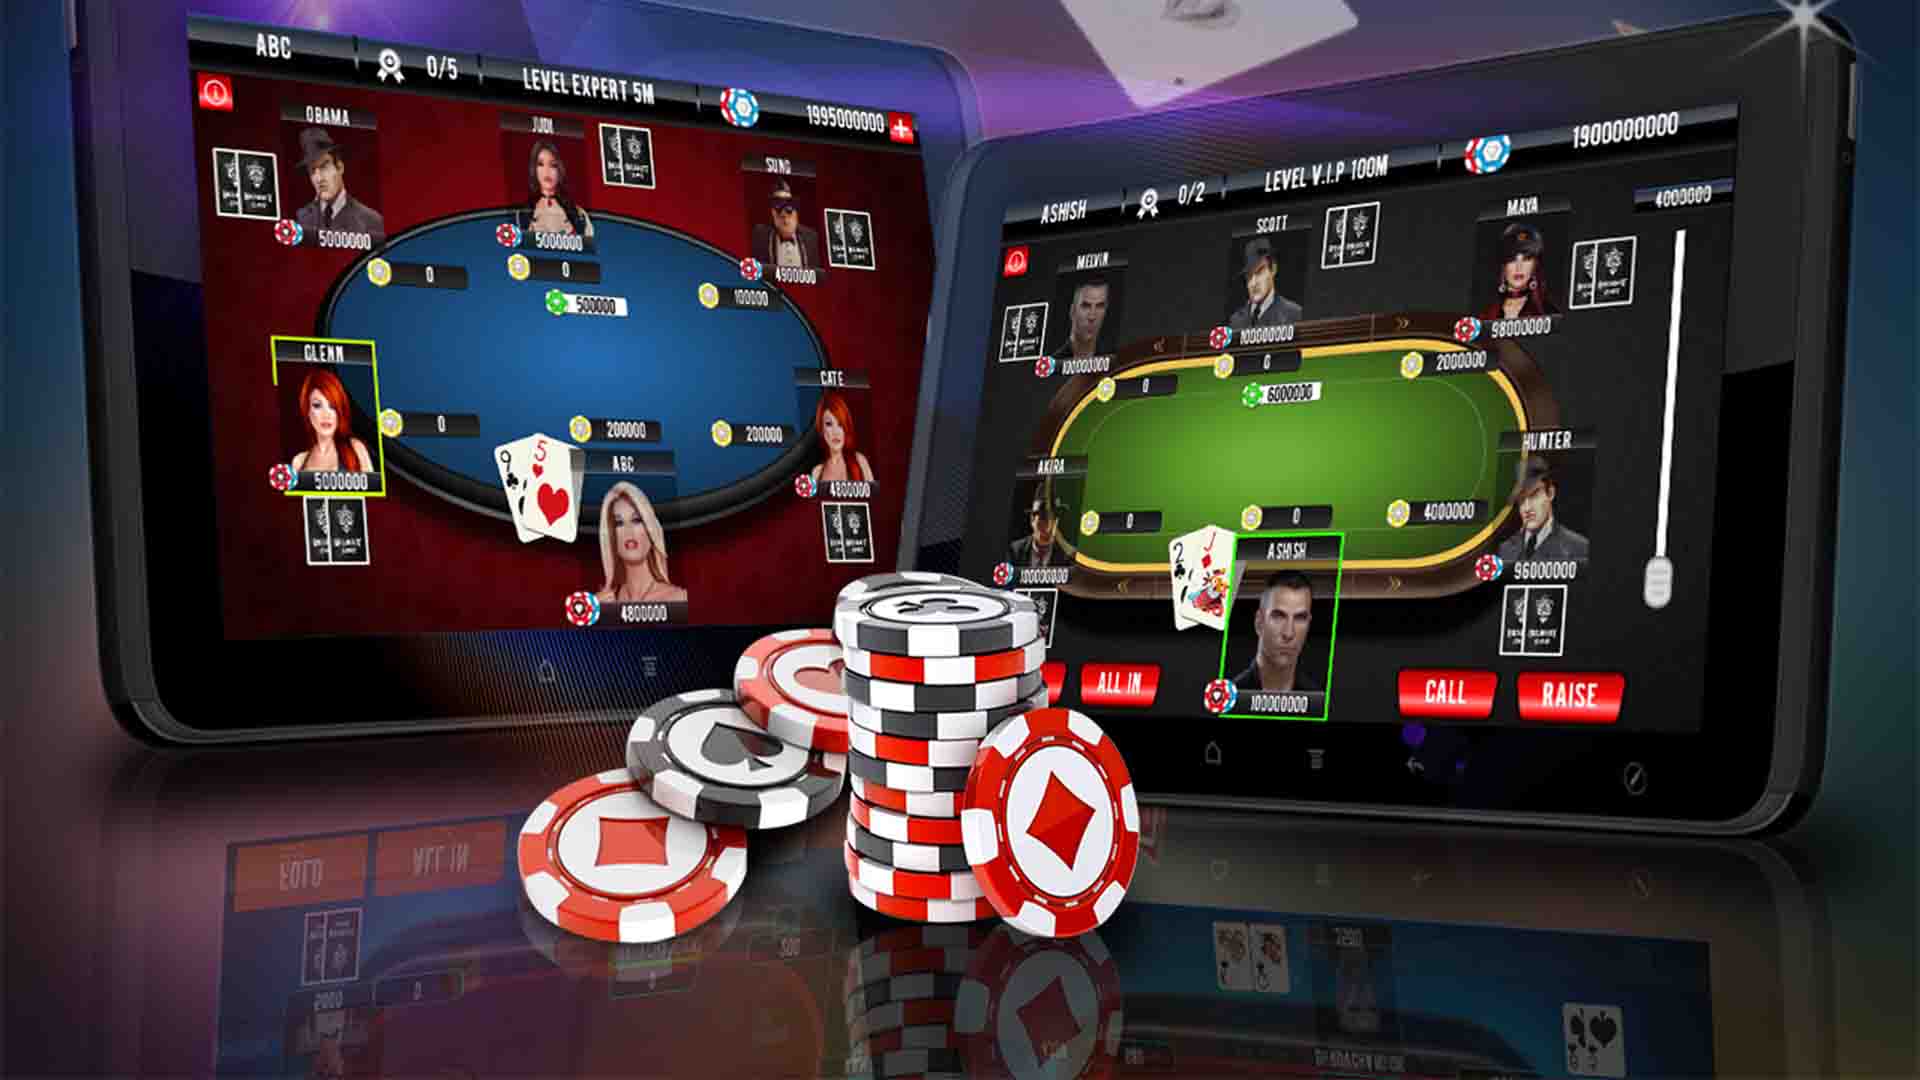 The casino site (카지노사이트) can guarantee your entertainment through its wide variety of options.